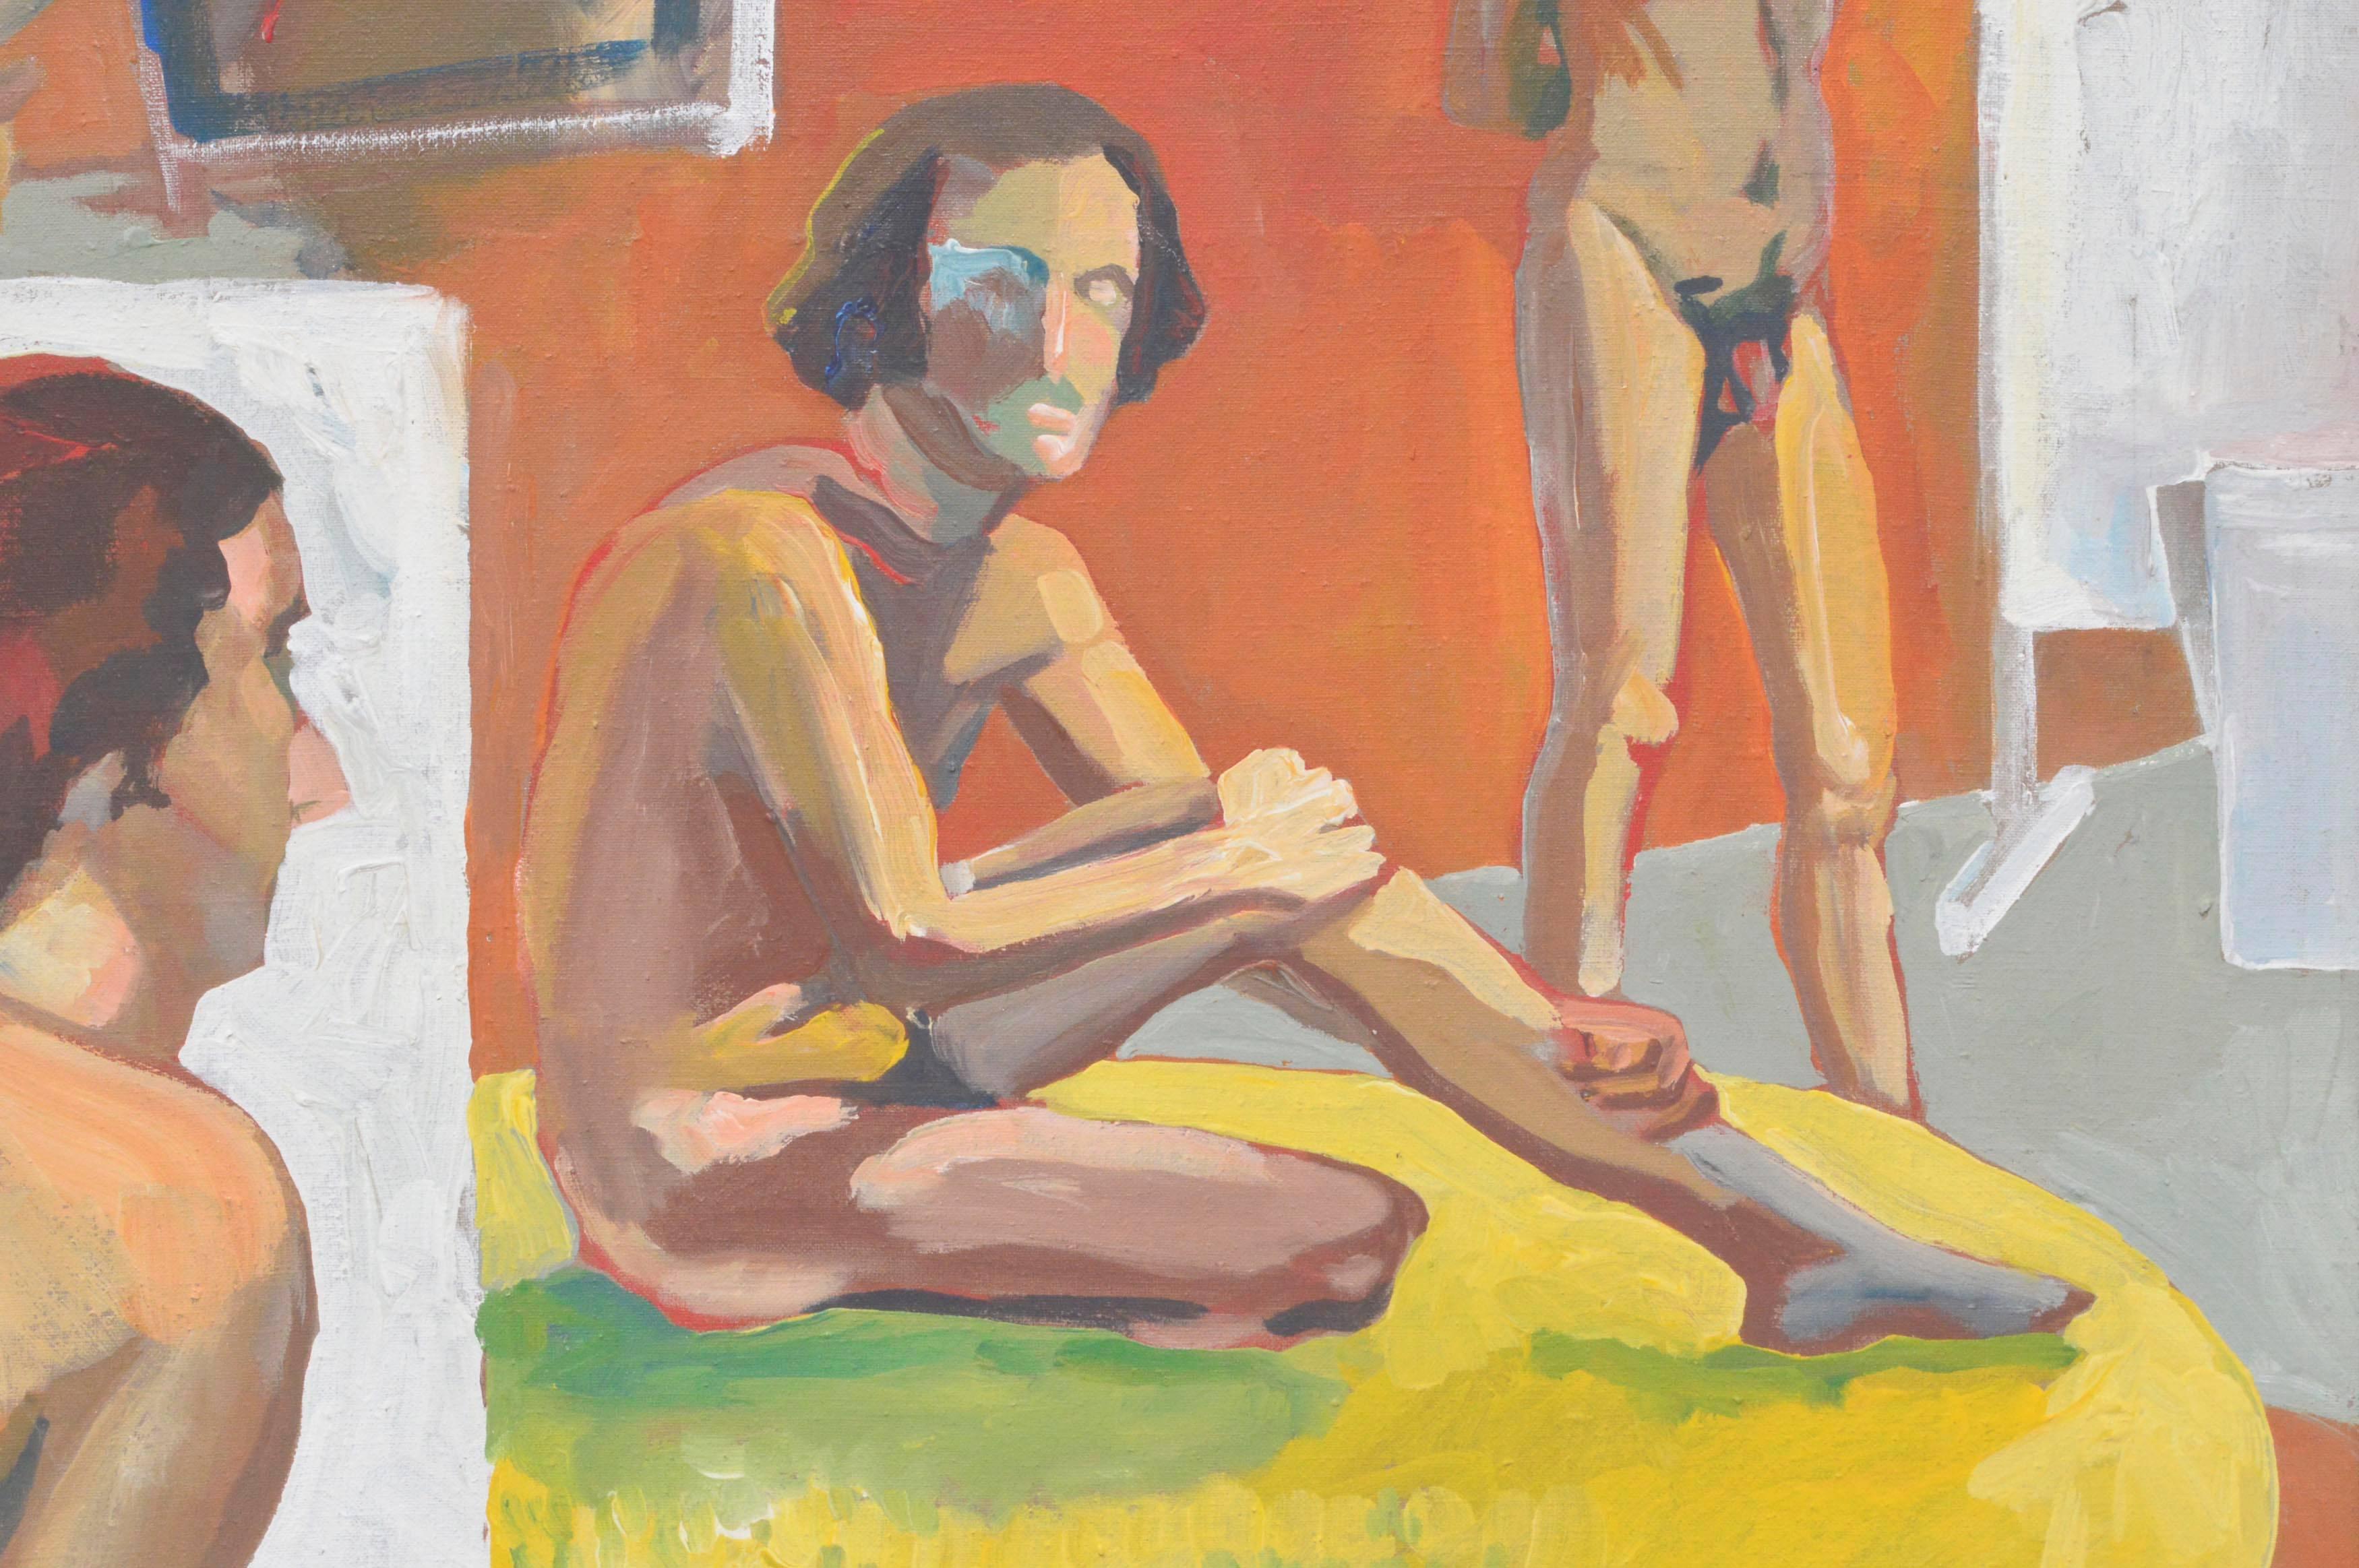 Berkeley School -- Male Dancer Figurative - Expressionist Painting by Patricia Gren Hayes